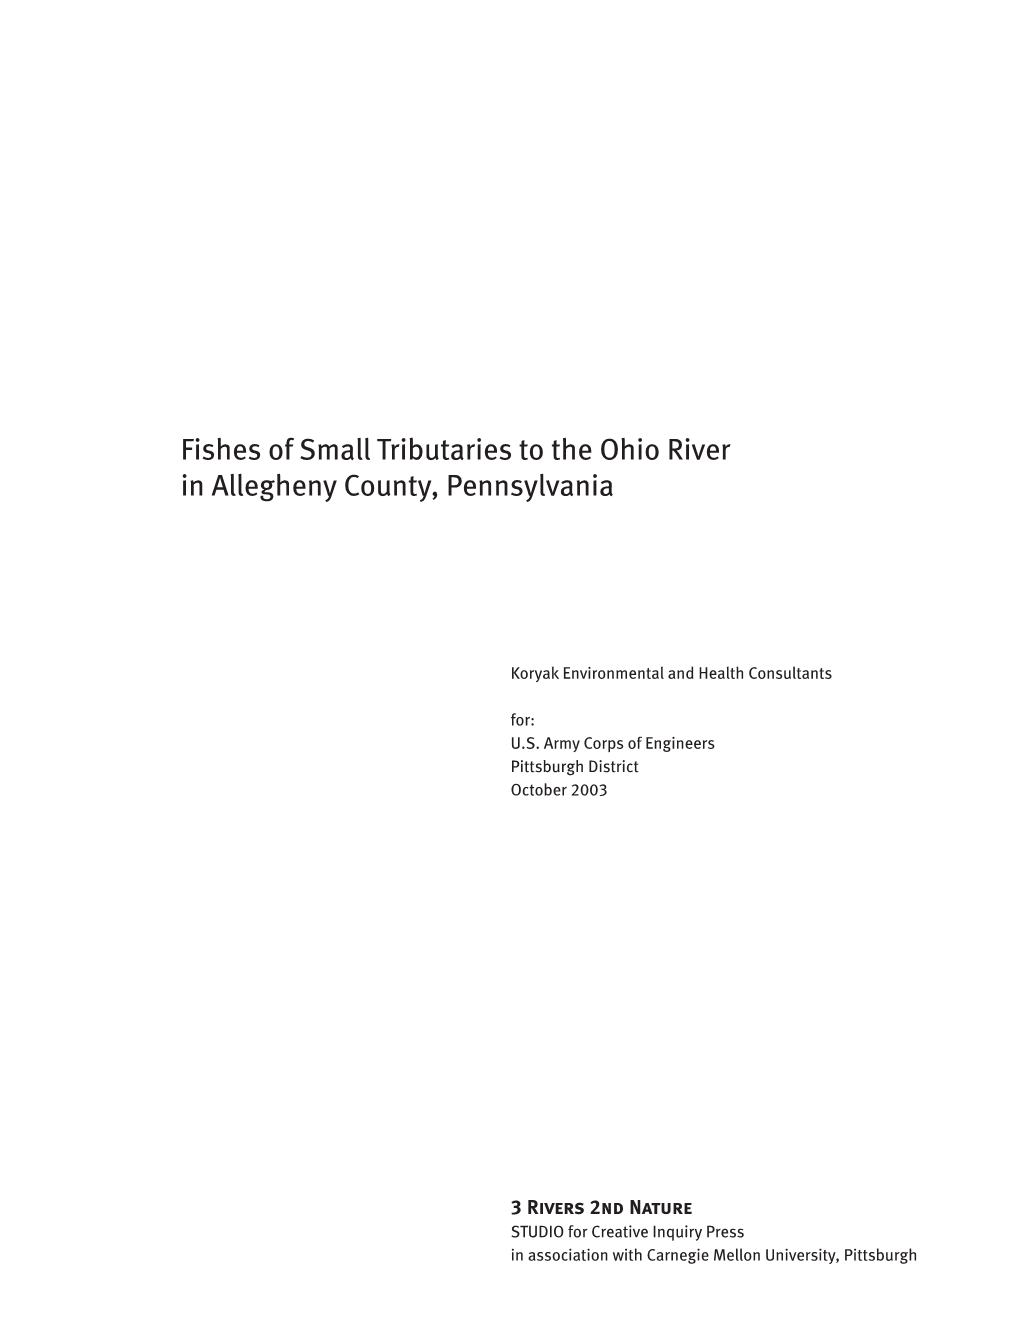 Fishes of Small Tributaries to the Ohio River in Allegheny County, Pennsylvania